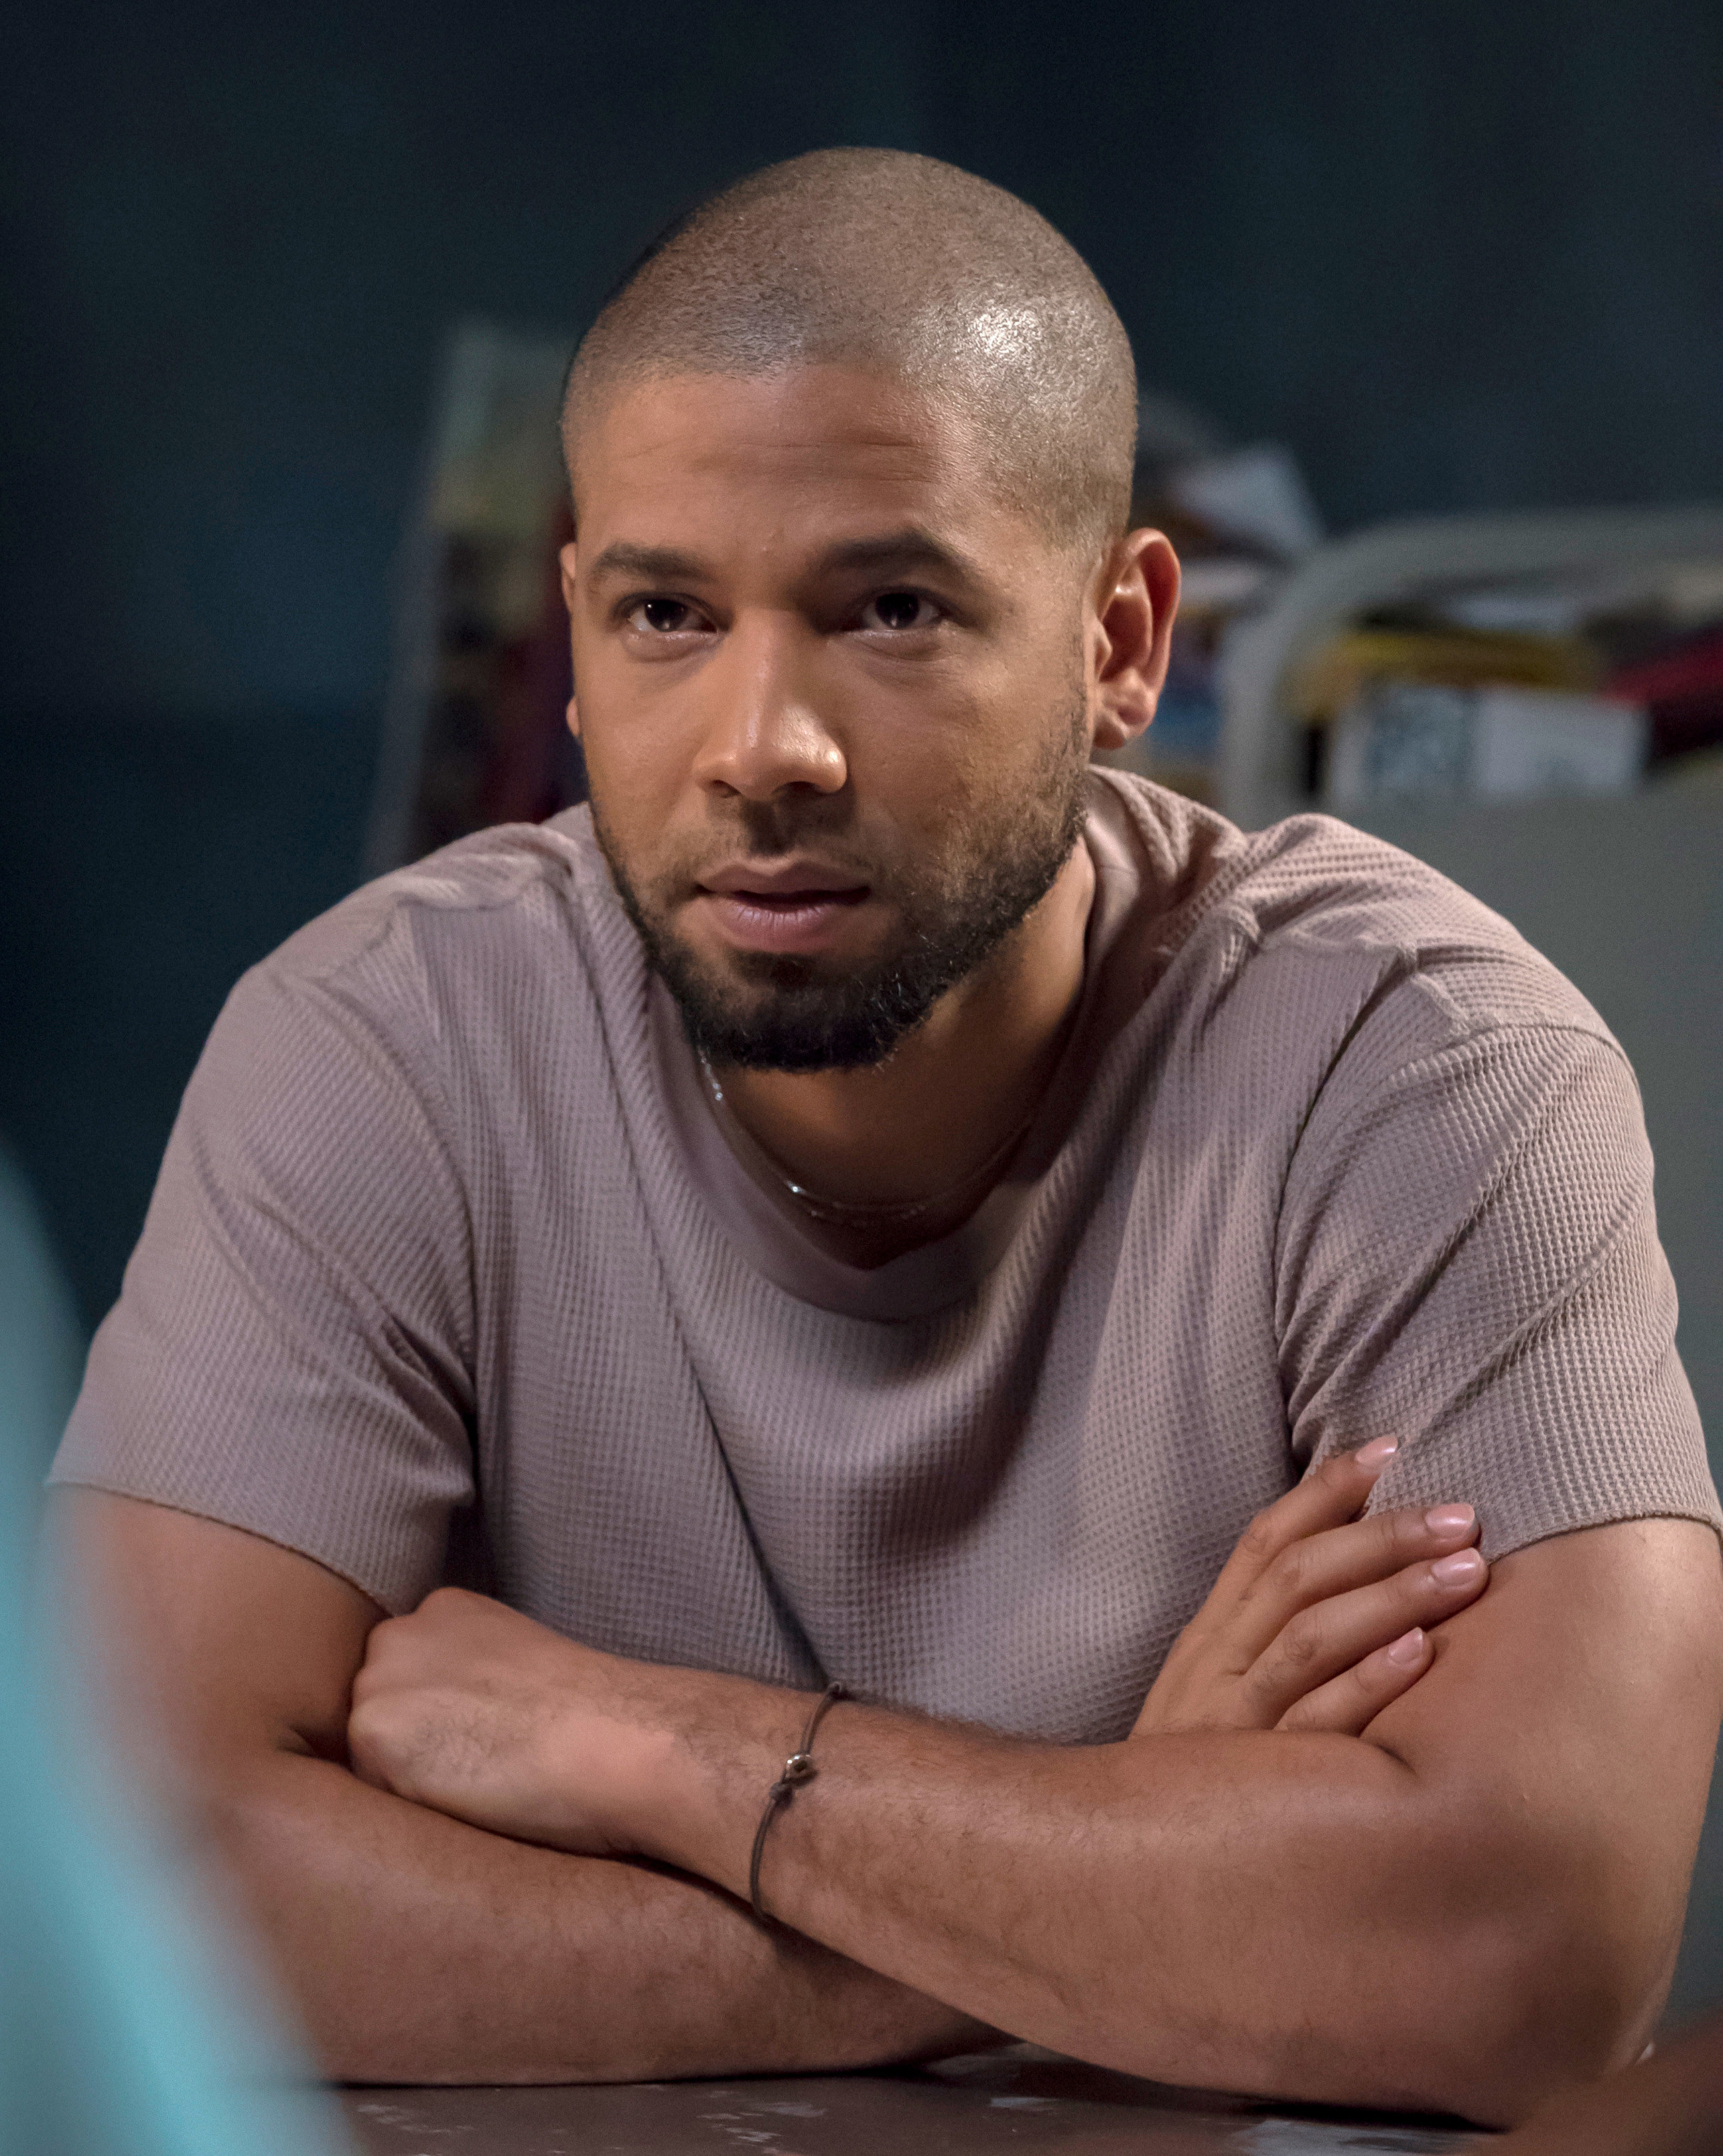 Smollett with arms crossed on show